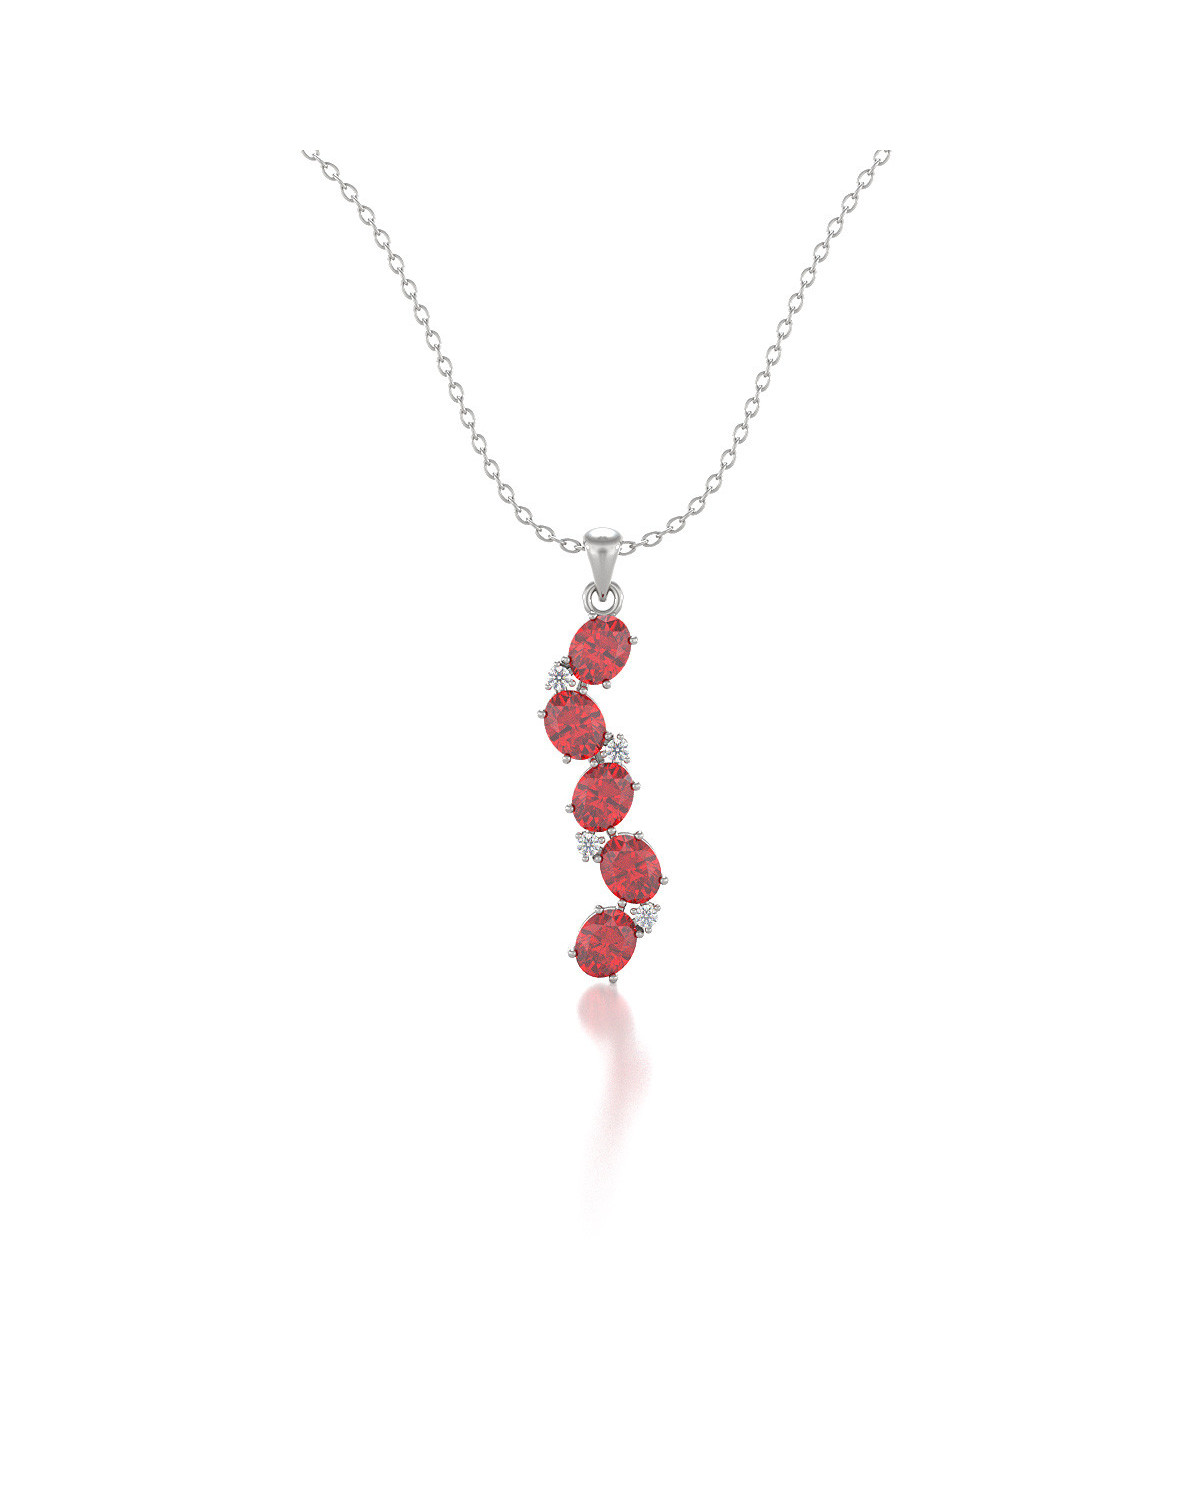 925 Silver Ruby Diamonds Necklace Pendant Chain included